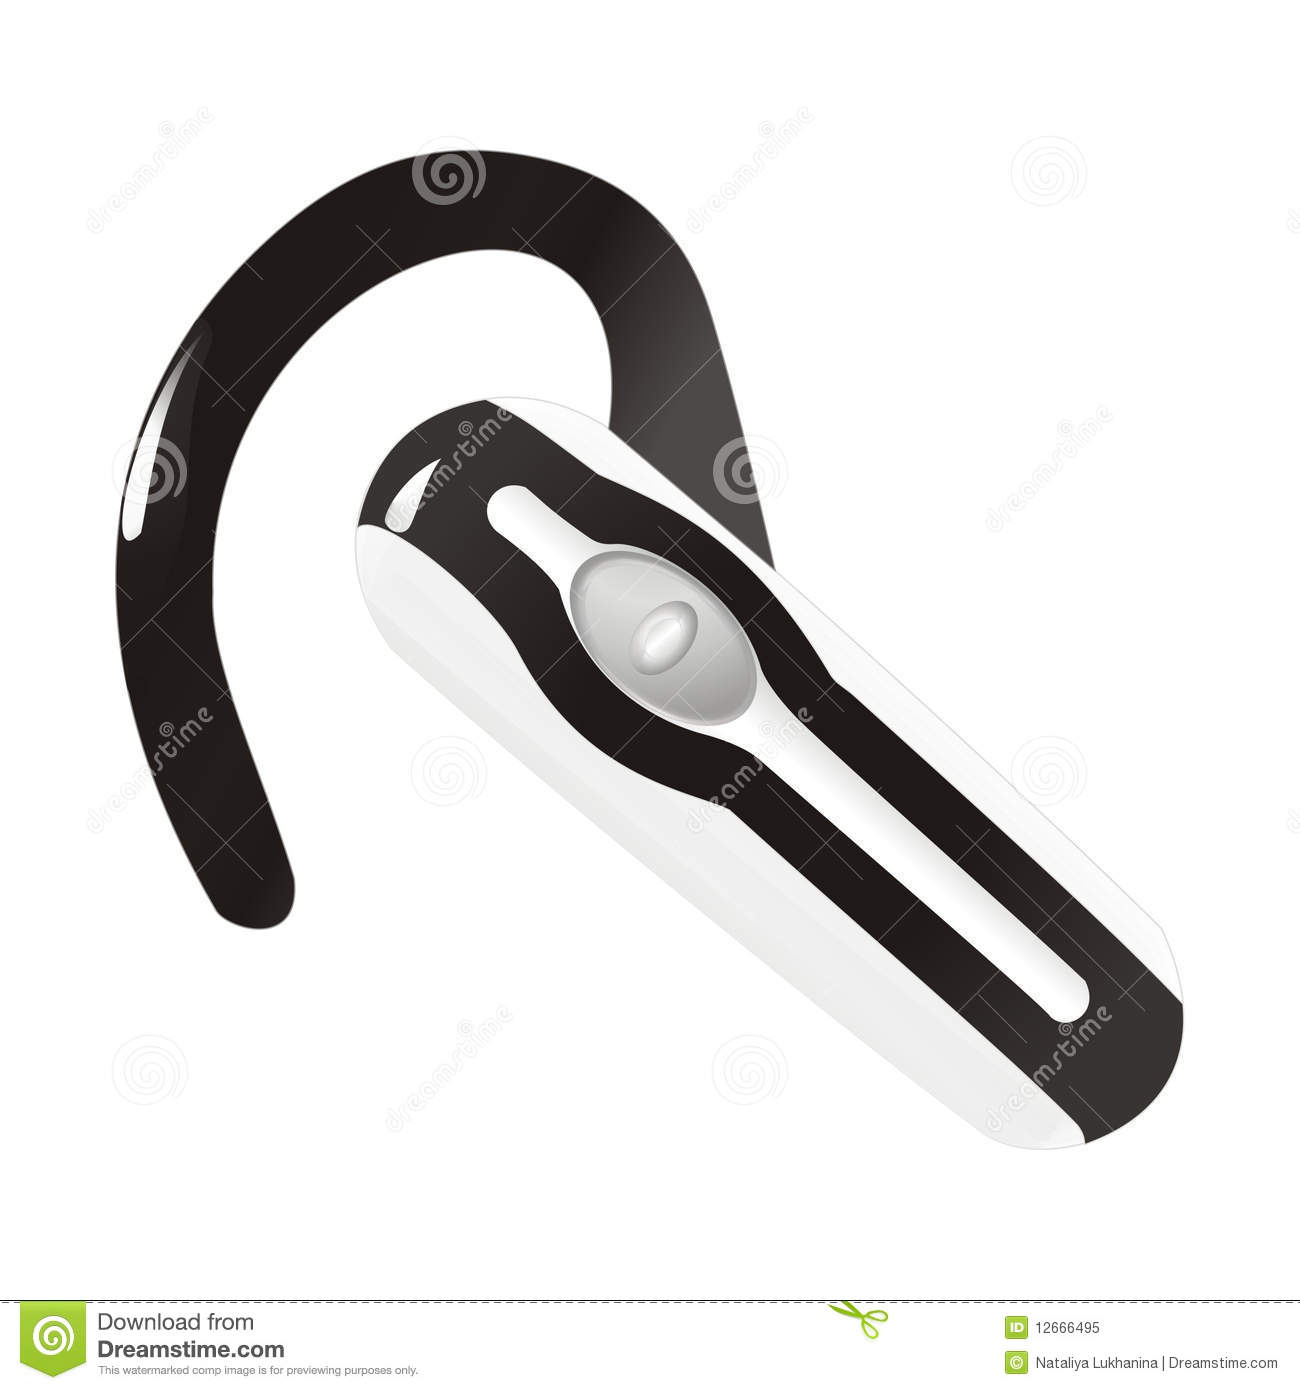 Vector Bluetooth Headset Royalty Free Stock Photo   Image  12666495